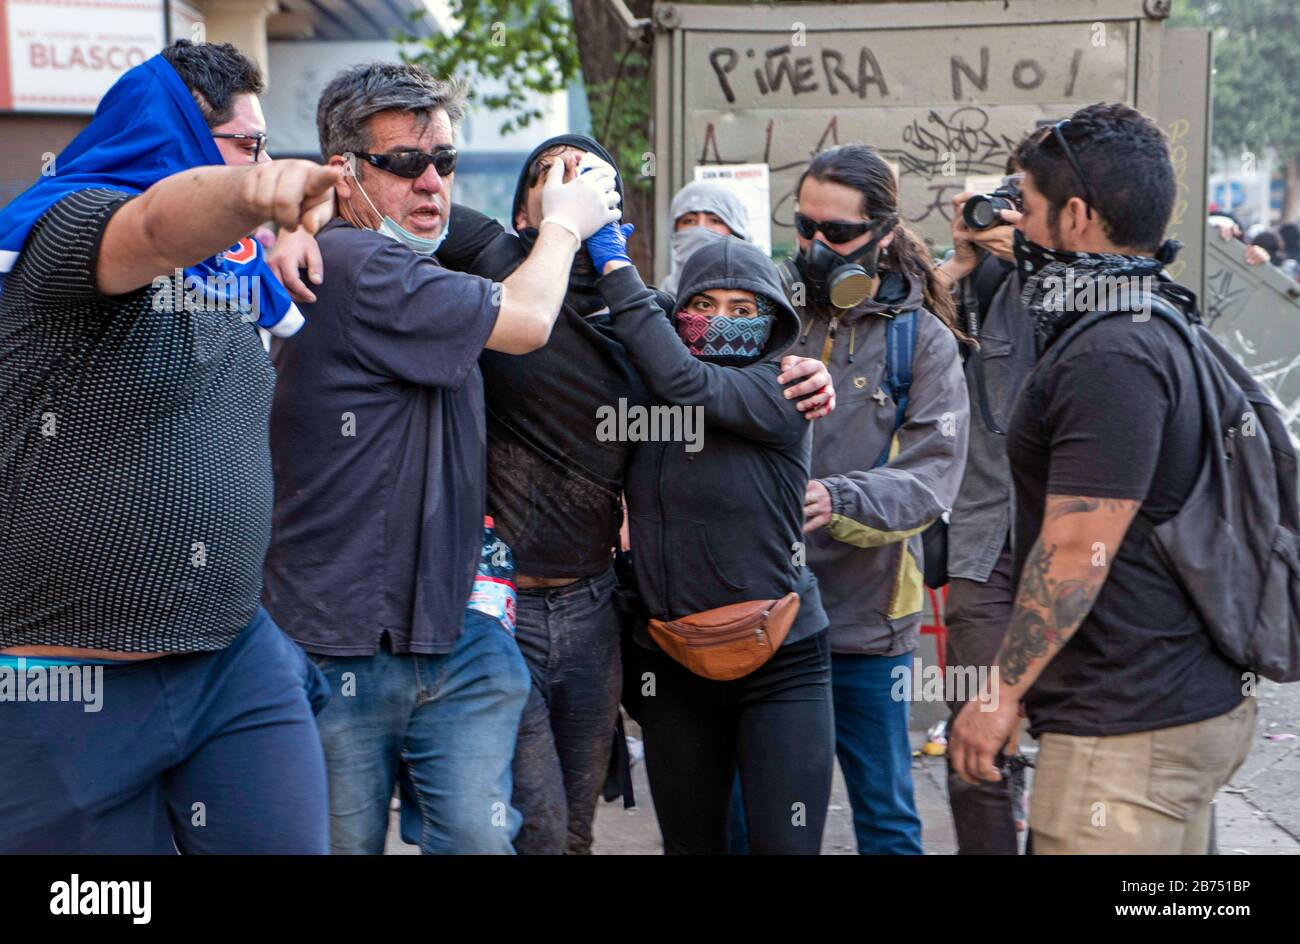 Chile, Santiago, 24.10.2019. Santiago in state of emergency on 24.10.2019. Demonstration at Plaza Baquedano in Santiago. Injured demonstrators with a rubber bullet in the eye. [automated translation] Stock Photo